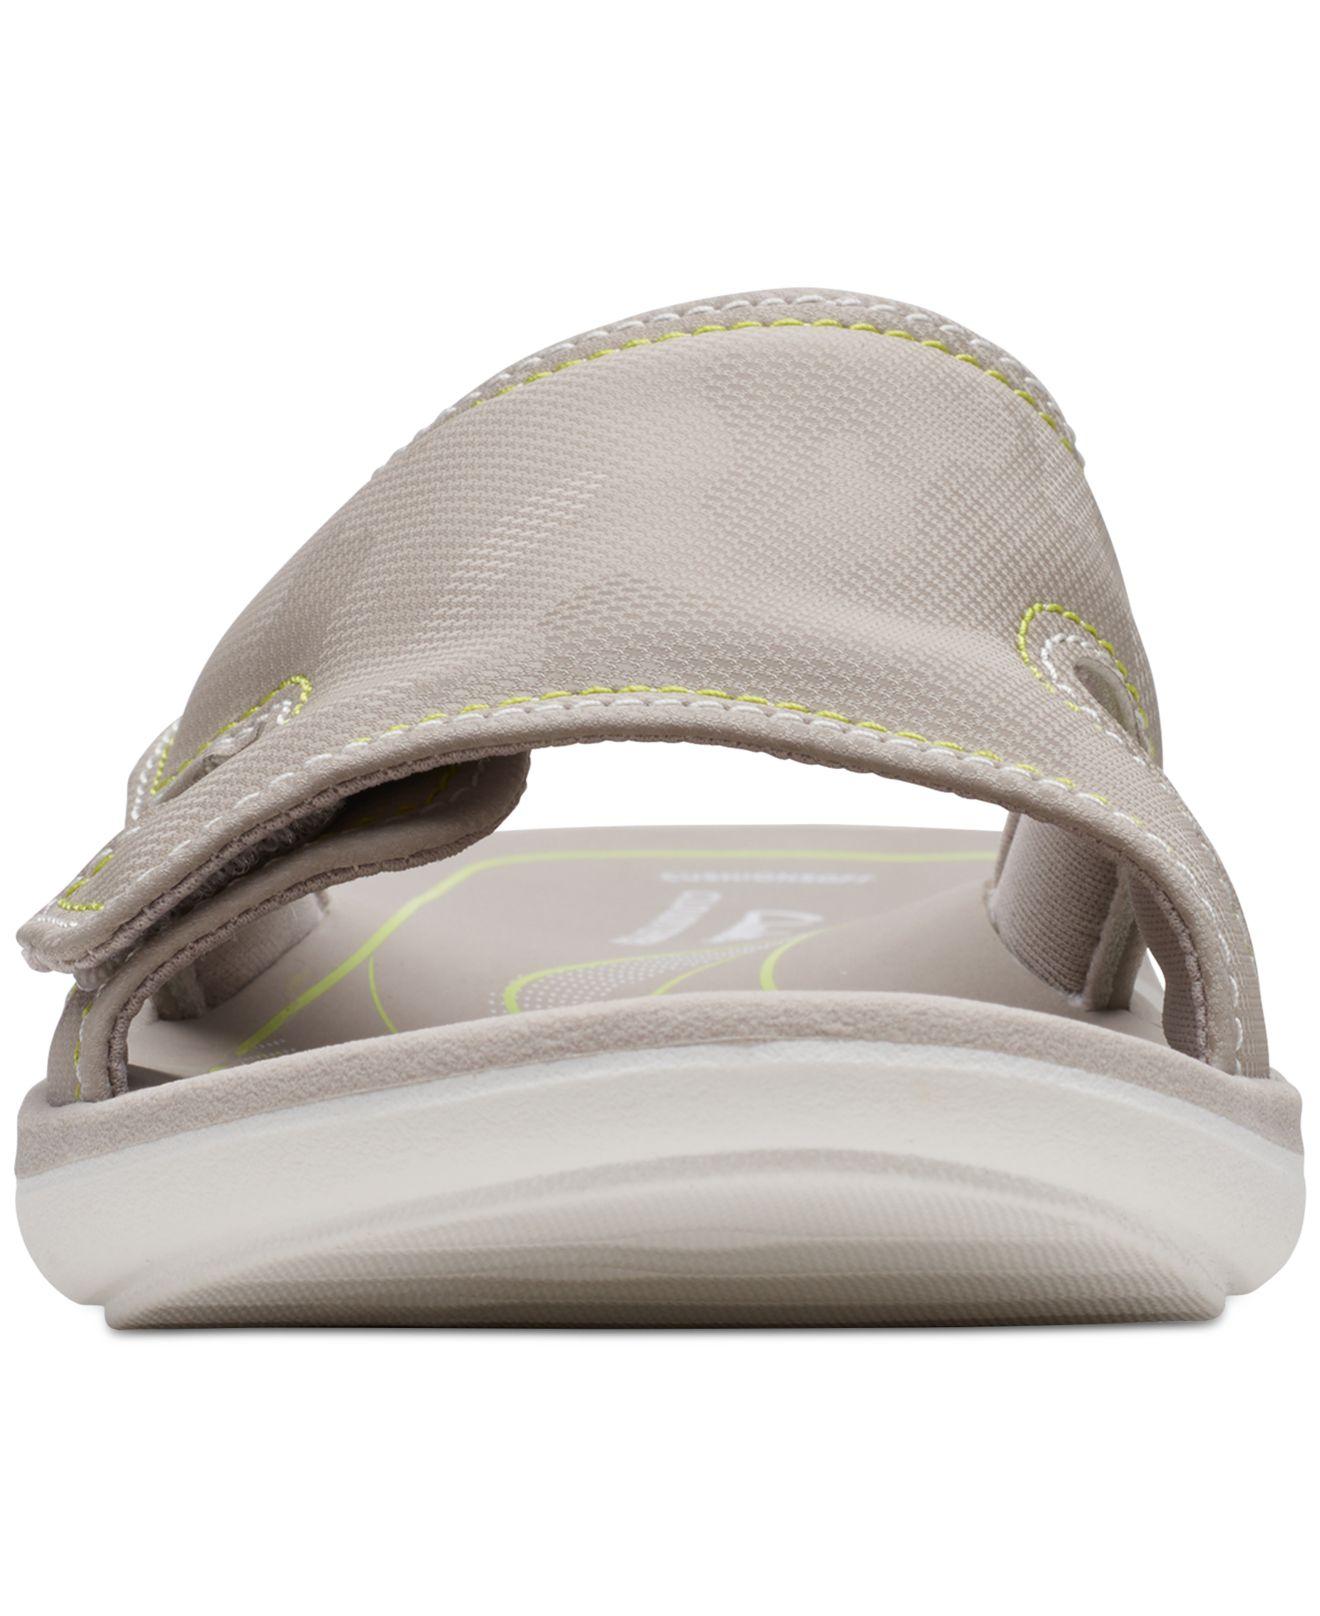 Clarks Cloudsteppers Glide Bay Slip-on Sandals in Gray | Lyst